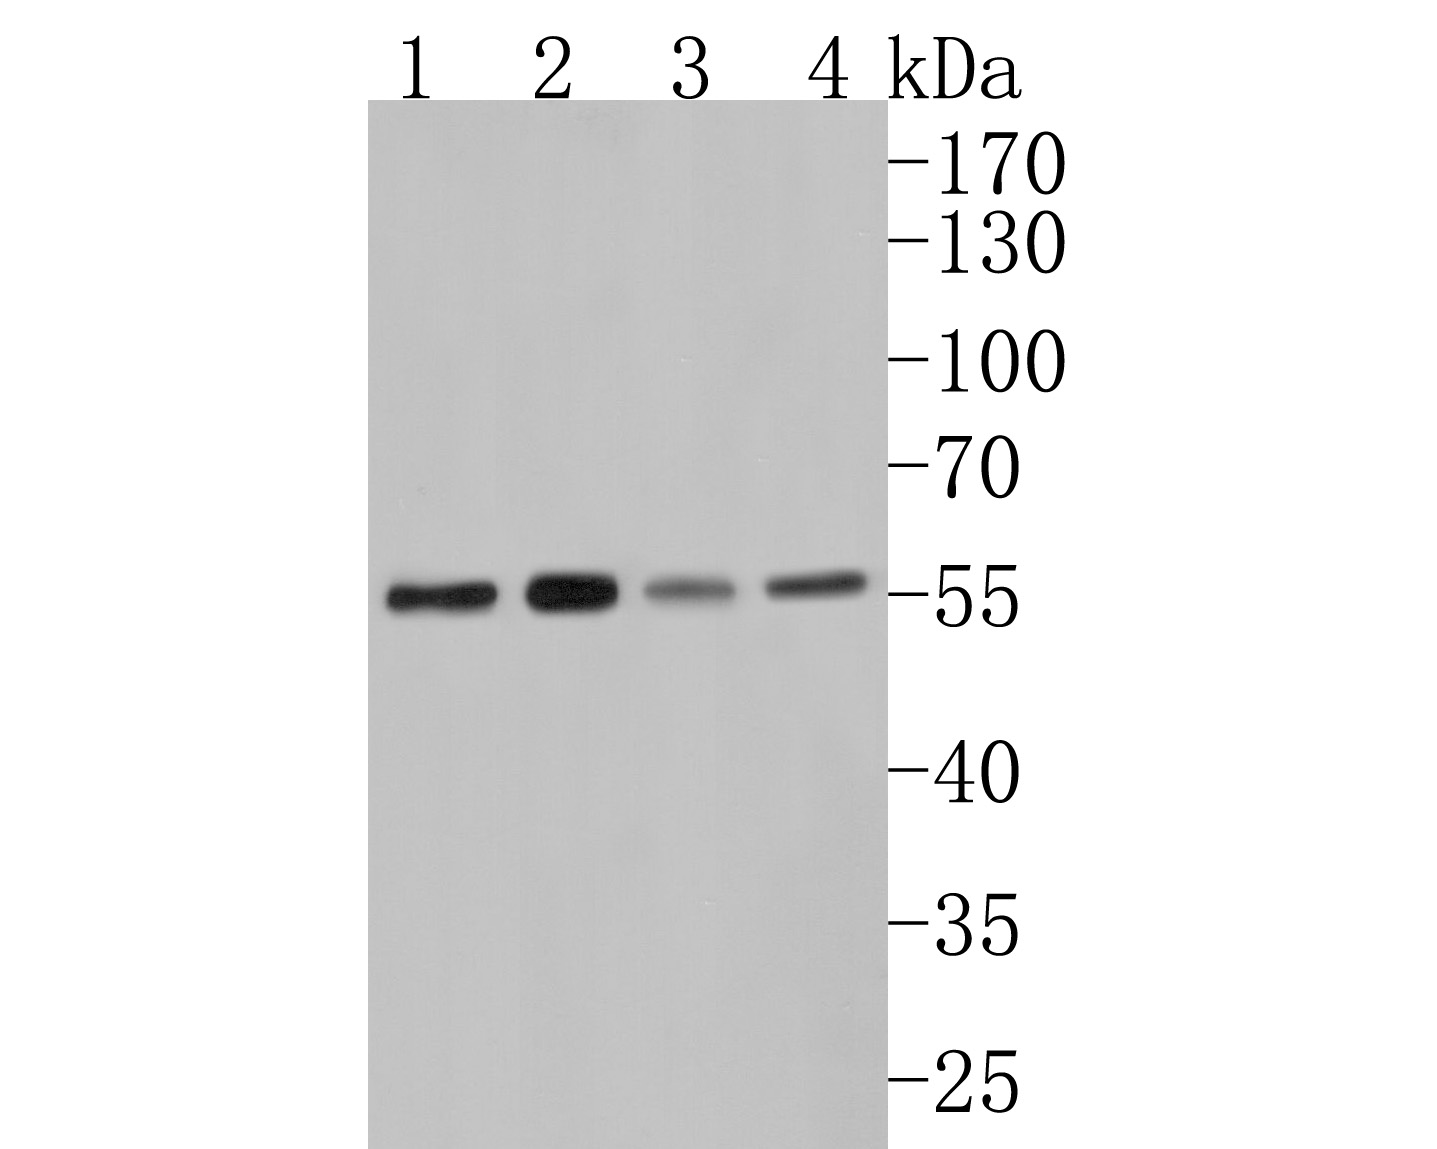 Western blot analysis of GATA4 on different lysates. Proteins were transferred to a PVDF membrane and blocked with 5% BSA in PBS for 1 hour at room temperature. The primary antibody (ET1704-32, 1/500) was used in 5% BSA at room temperature for 2 hours. Goat Anti-Rabbit IgG - HRP Secondary Antibody (HA1001) at 1:200,000 dilution was used for 1 hour at room temperature.<br />
Positive control: <br />
Lane 2: Hela cell lysate<br />
Lane 2: 293 cell lysate<br />
Lane 1: Rat liver tissue lysate<br />
Lane 2: PC-3 cell lysate